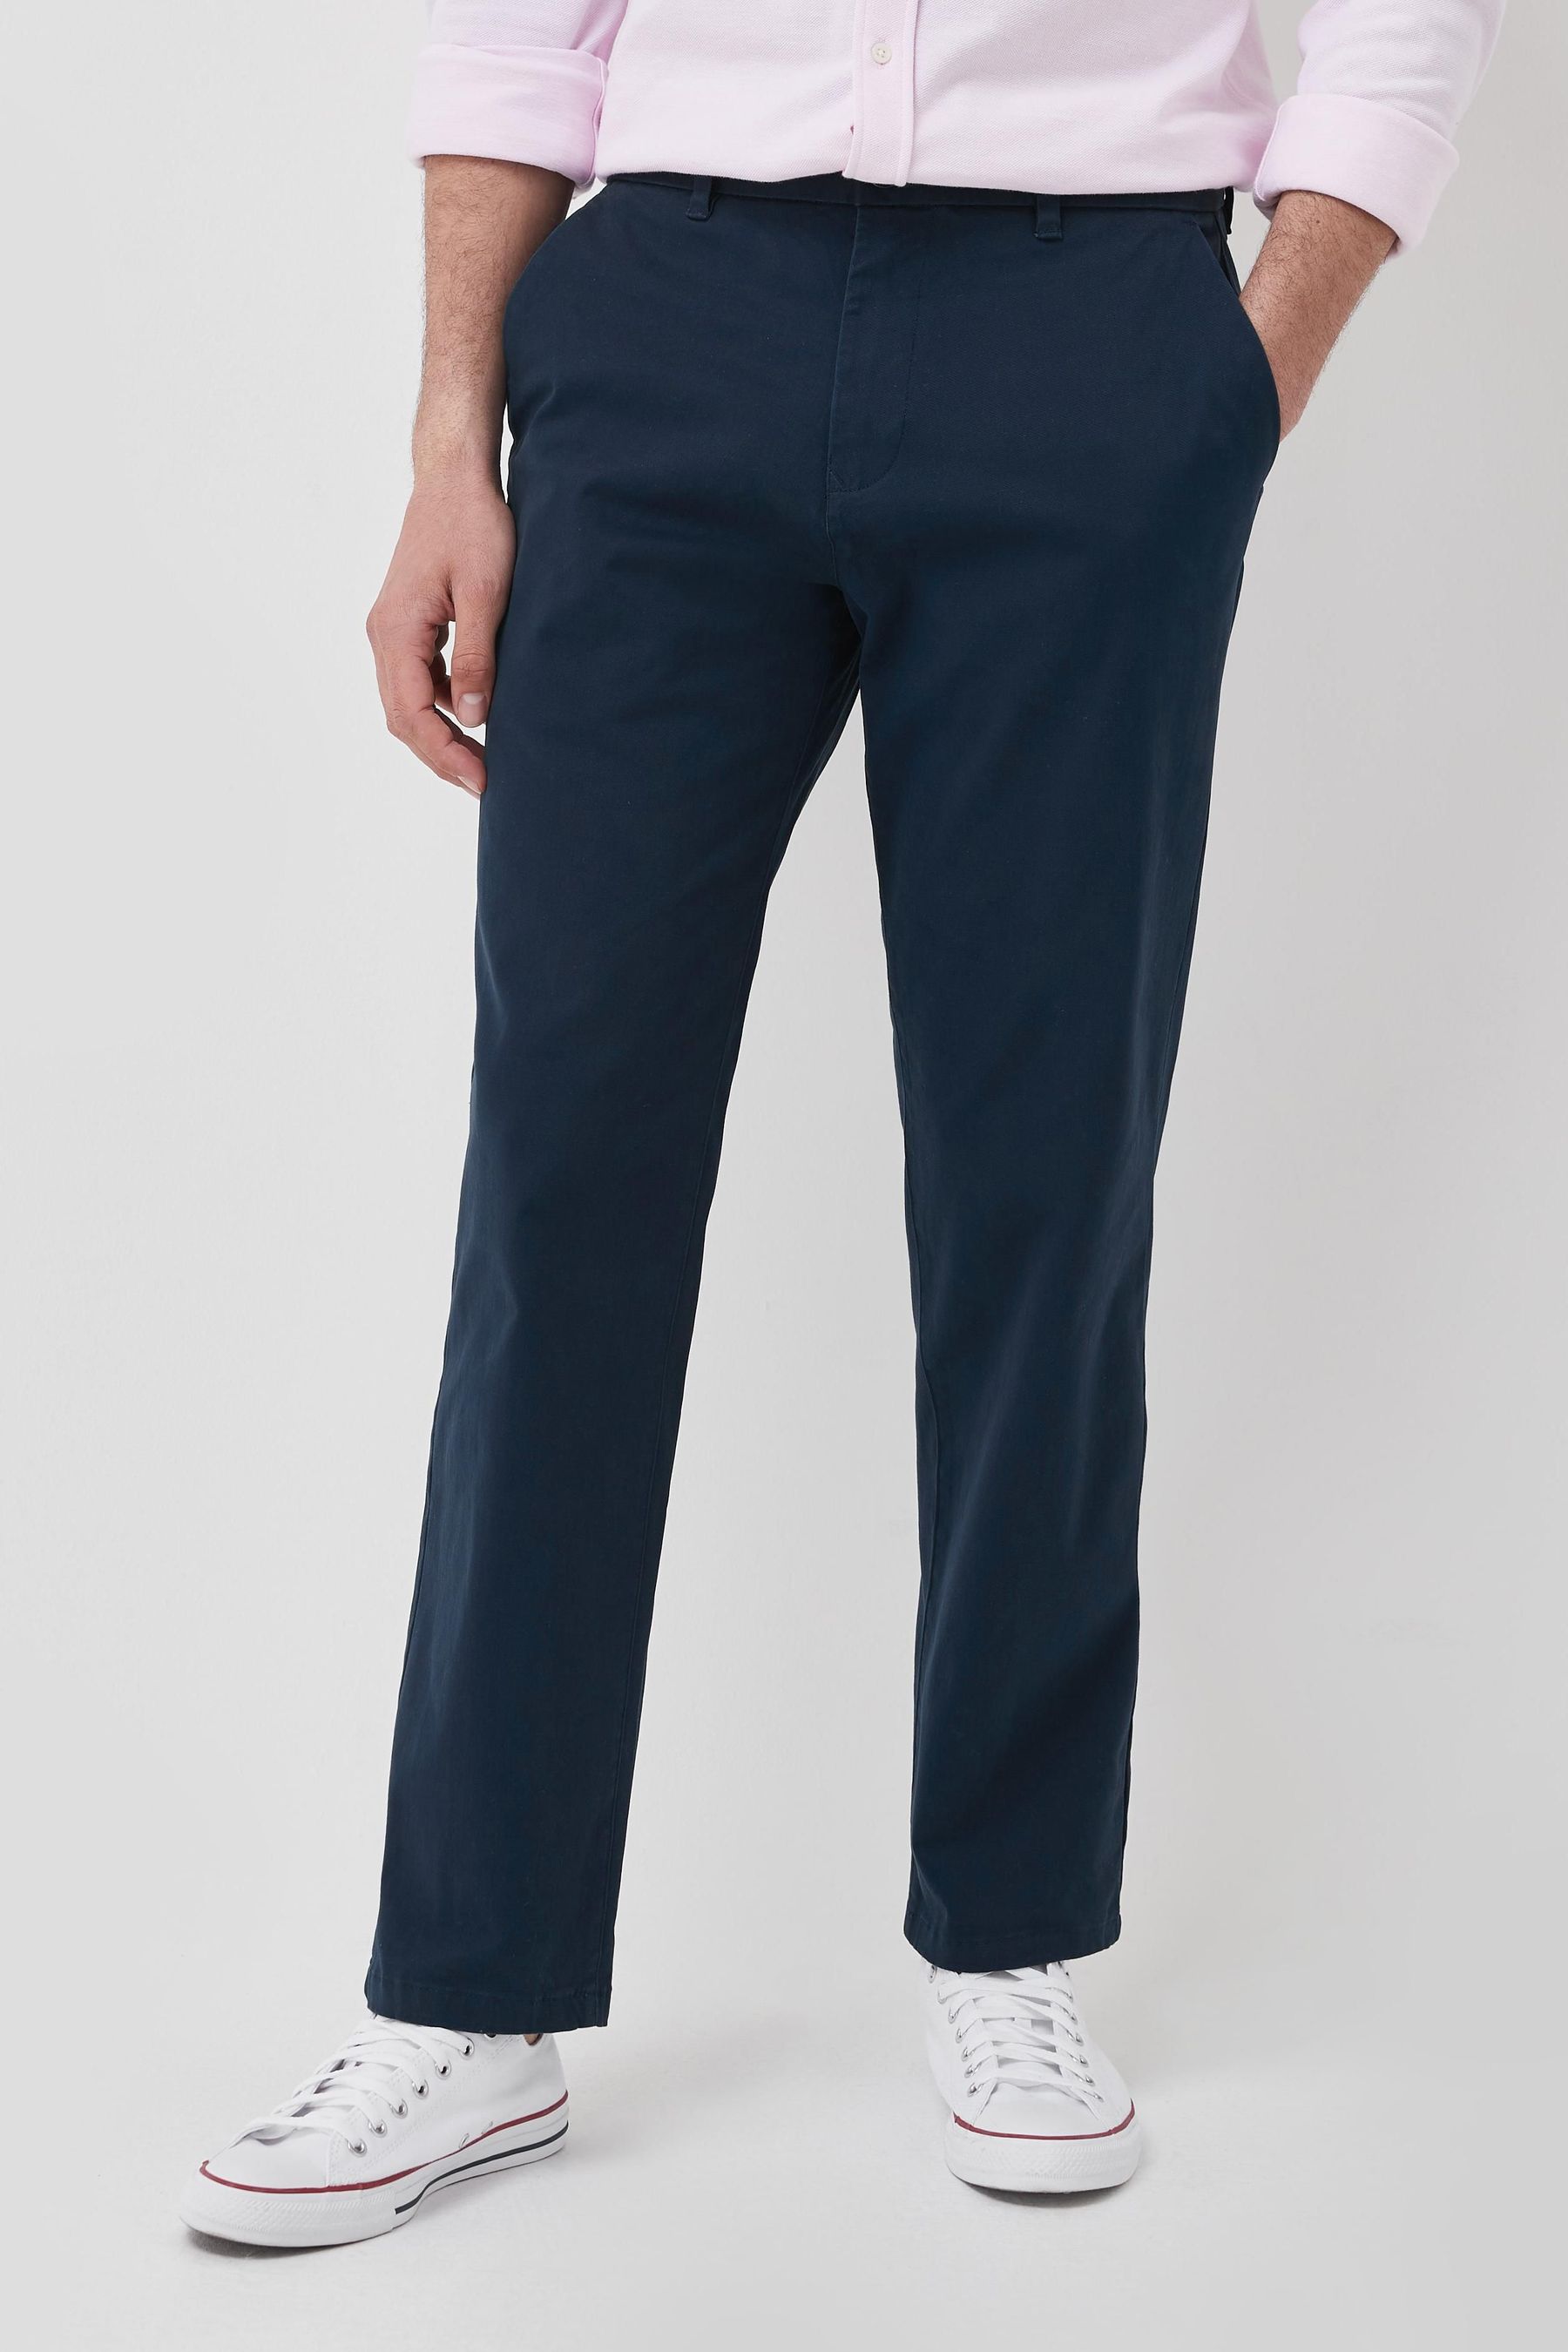 Buy Dark Blue Relaxed Fit Stretch Chino Trousers from the Next UK ...